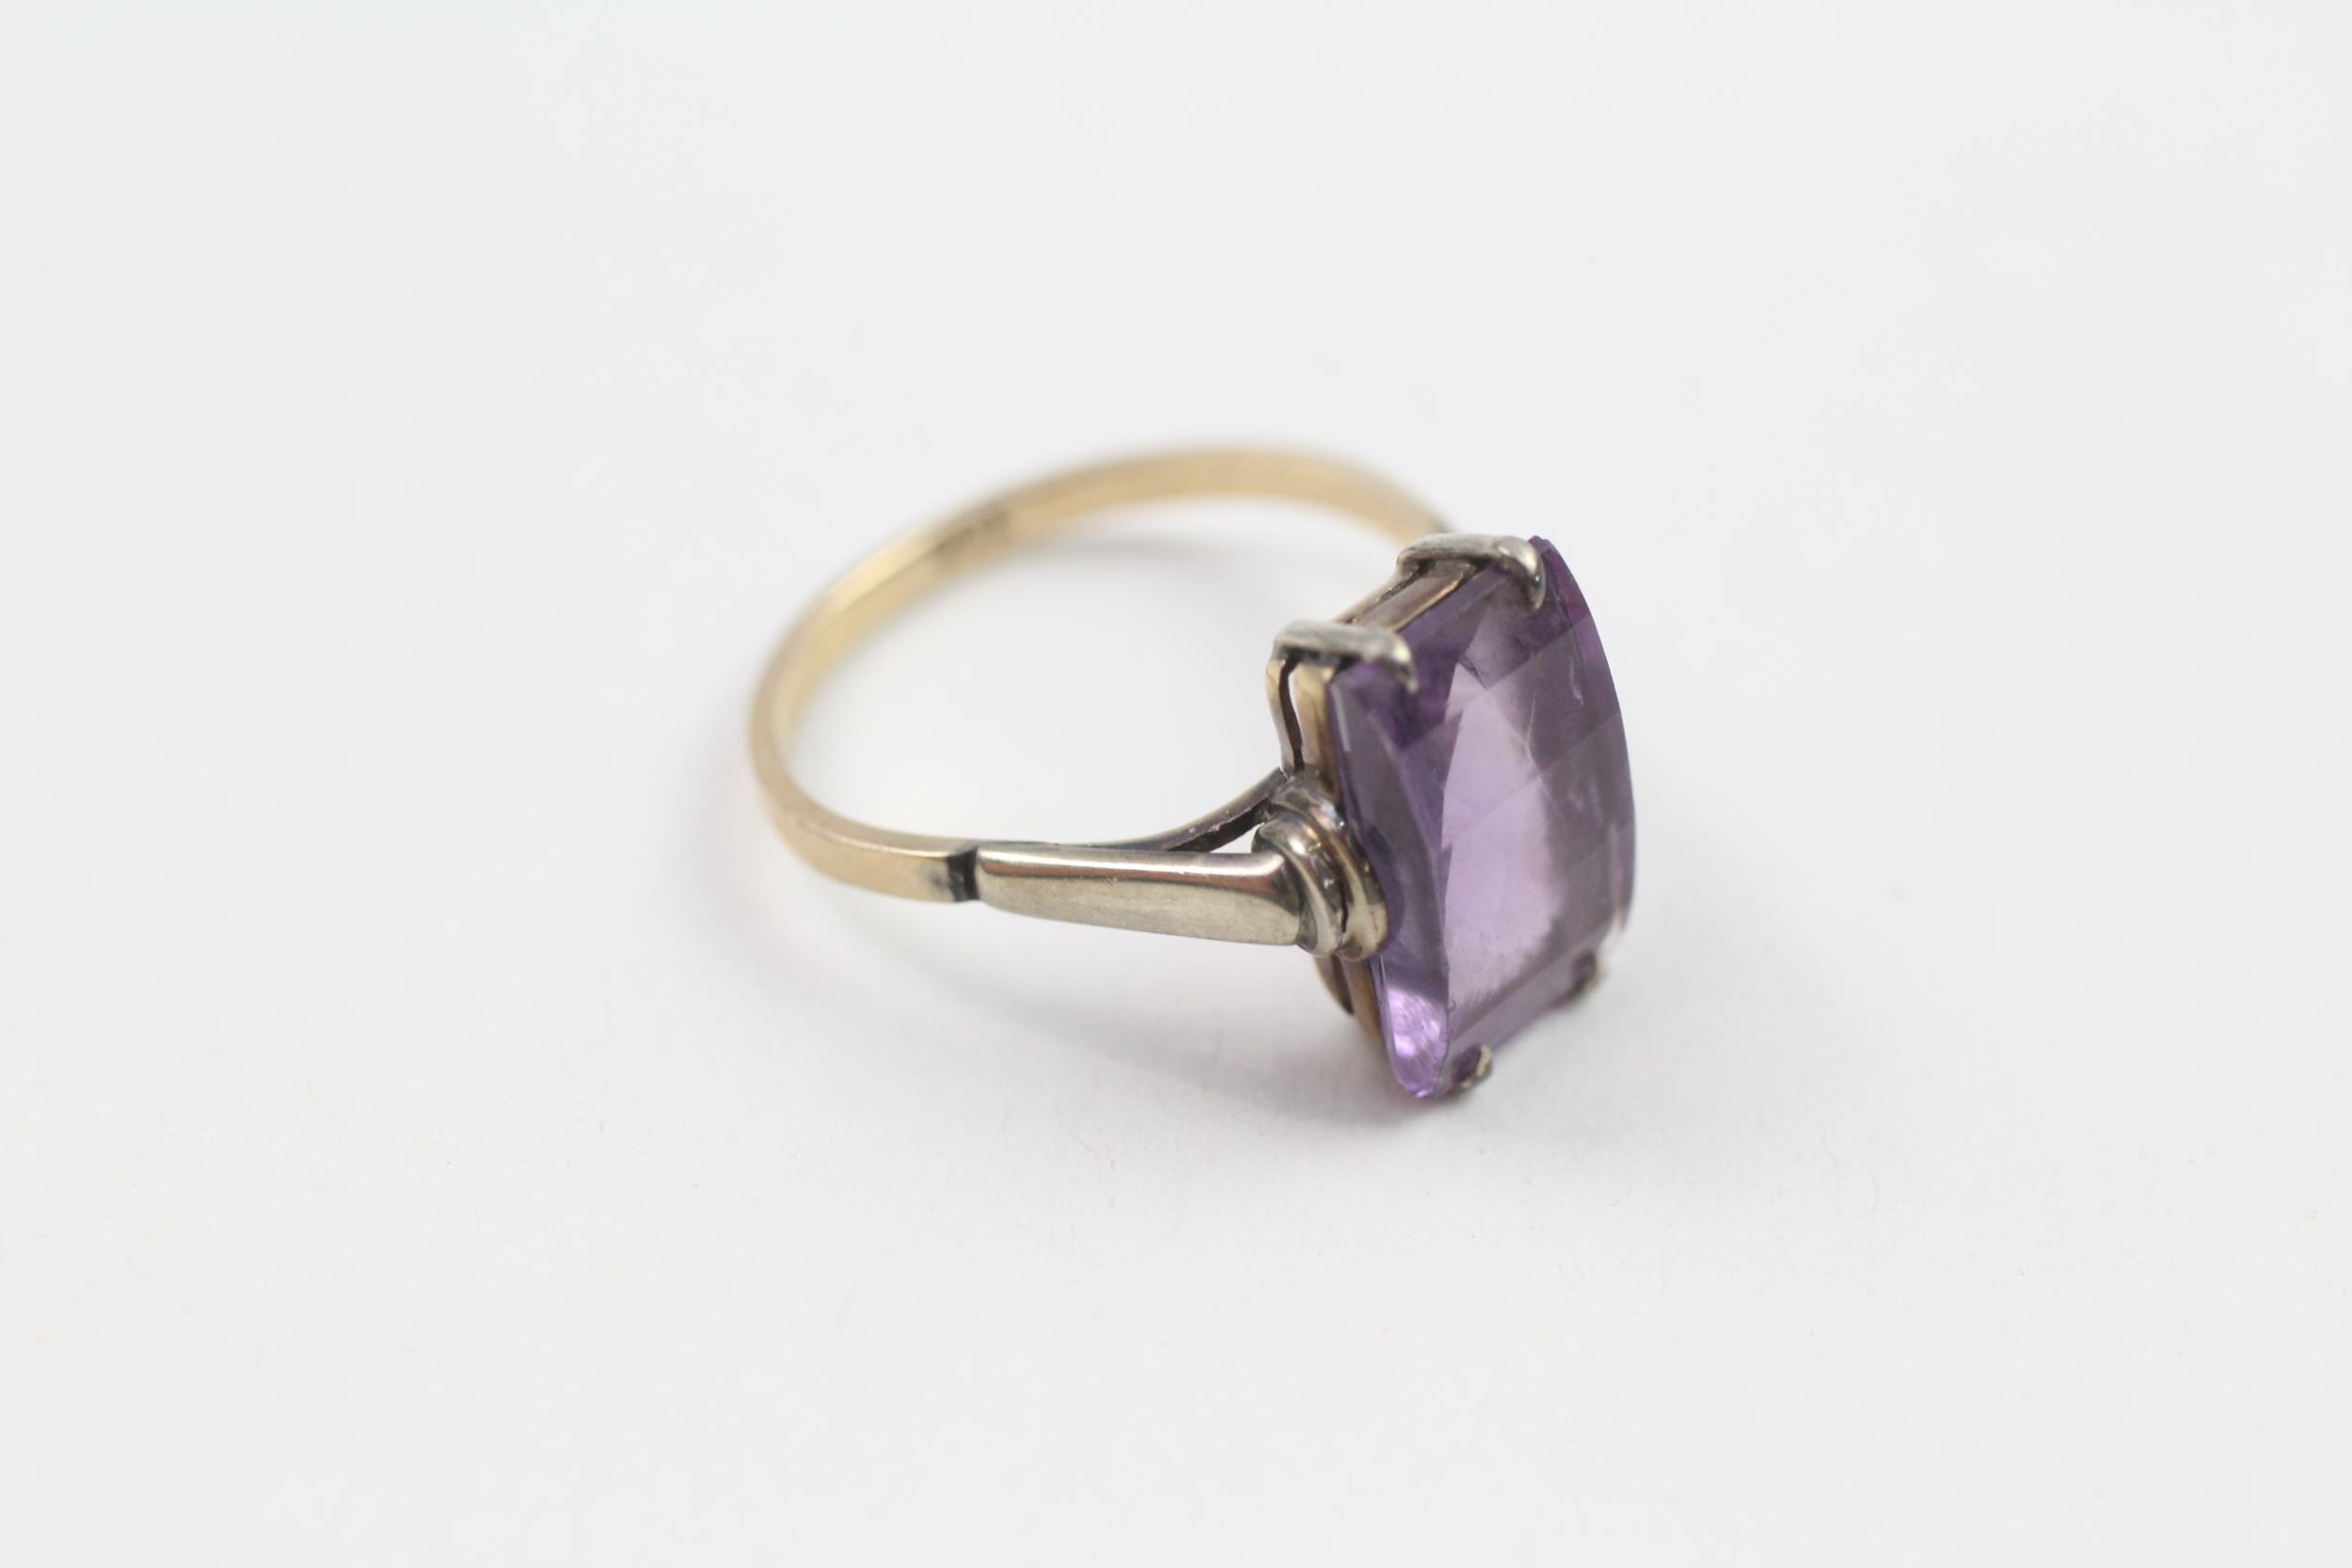 9ct gold antique fancy cut amethyst single stone ring Size L 1/2 2.1 g - Image 3 of 4